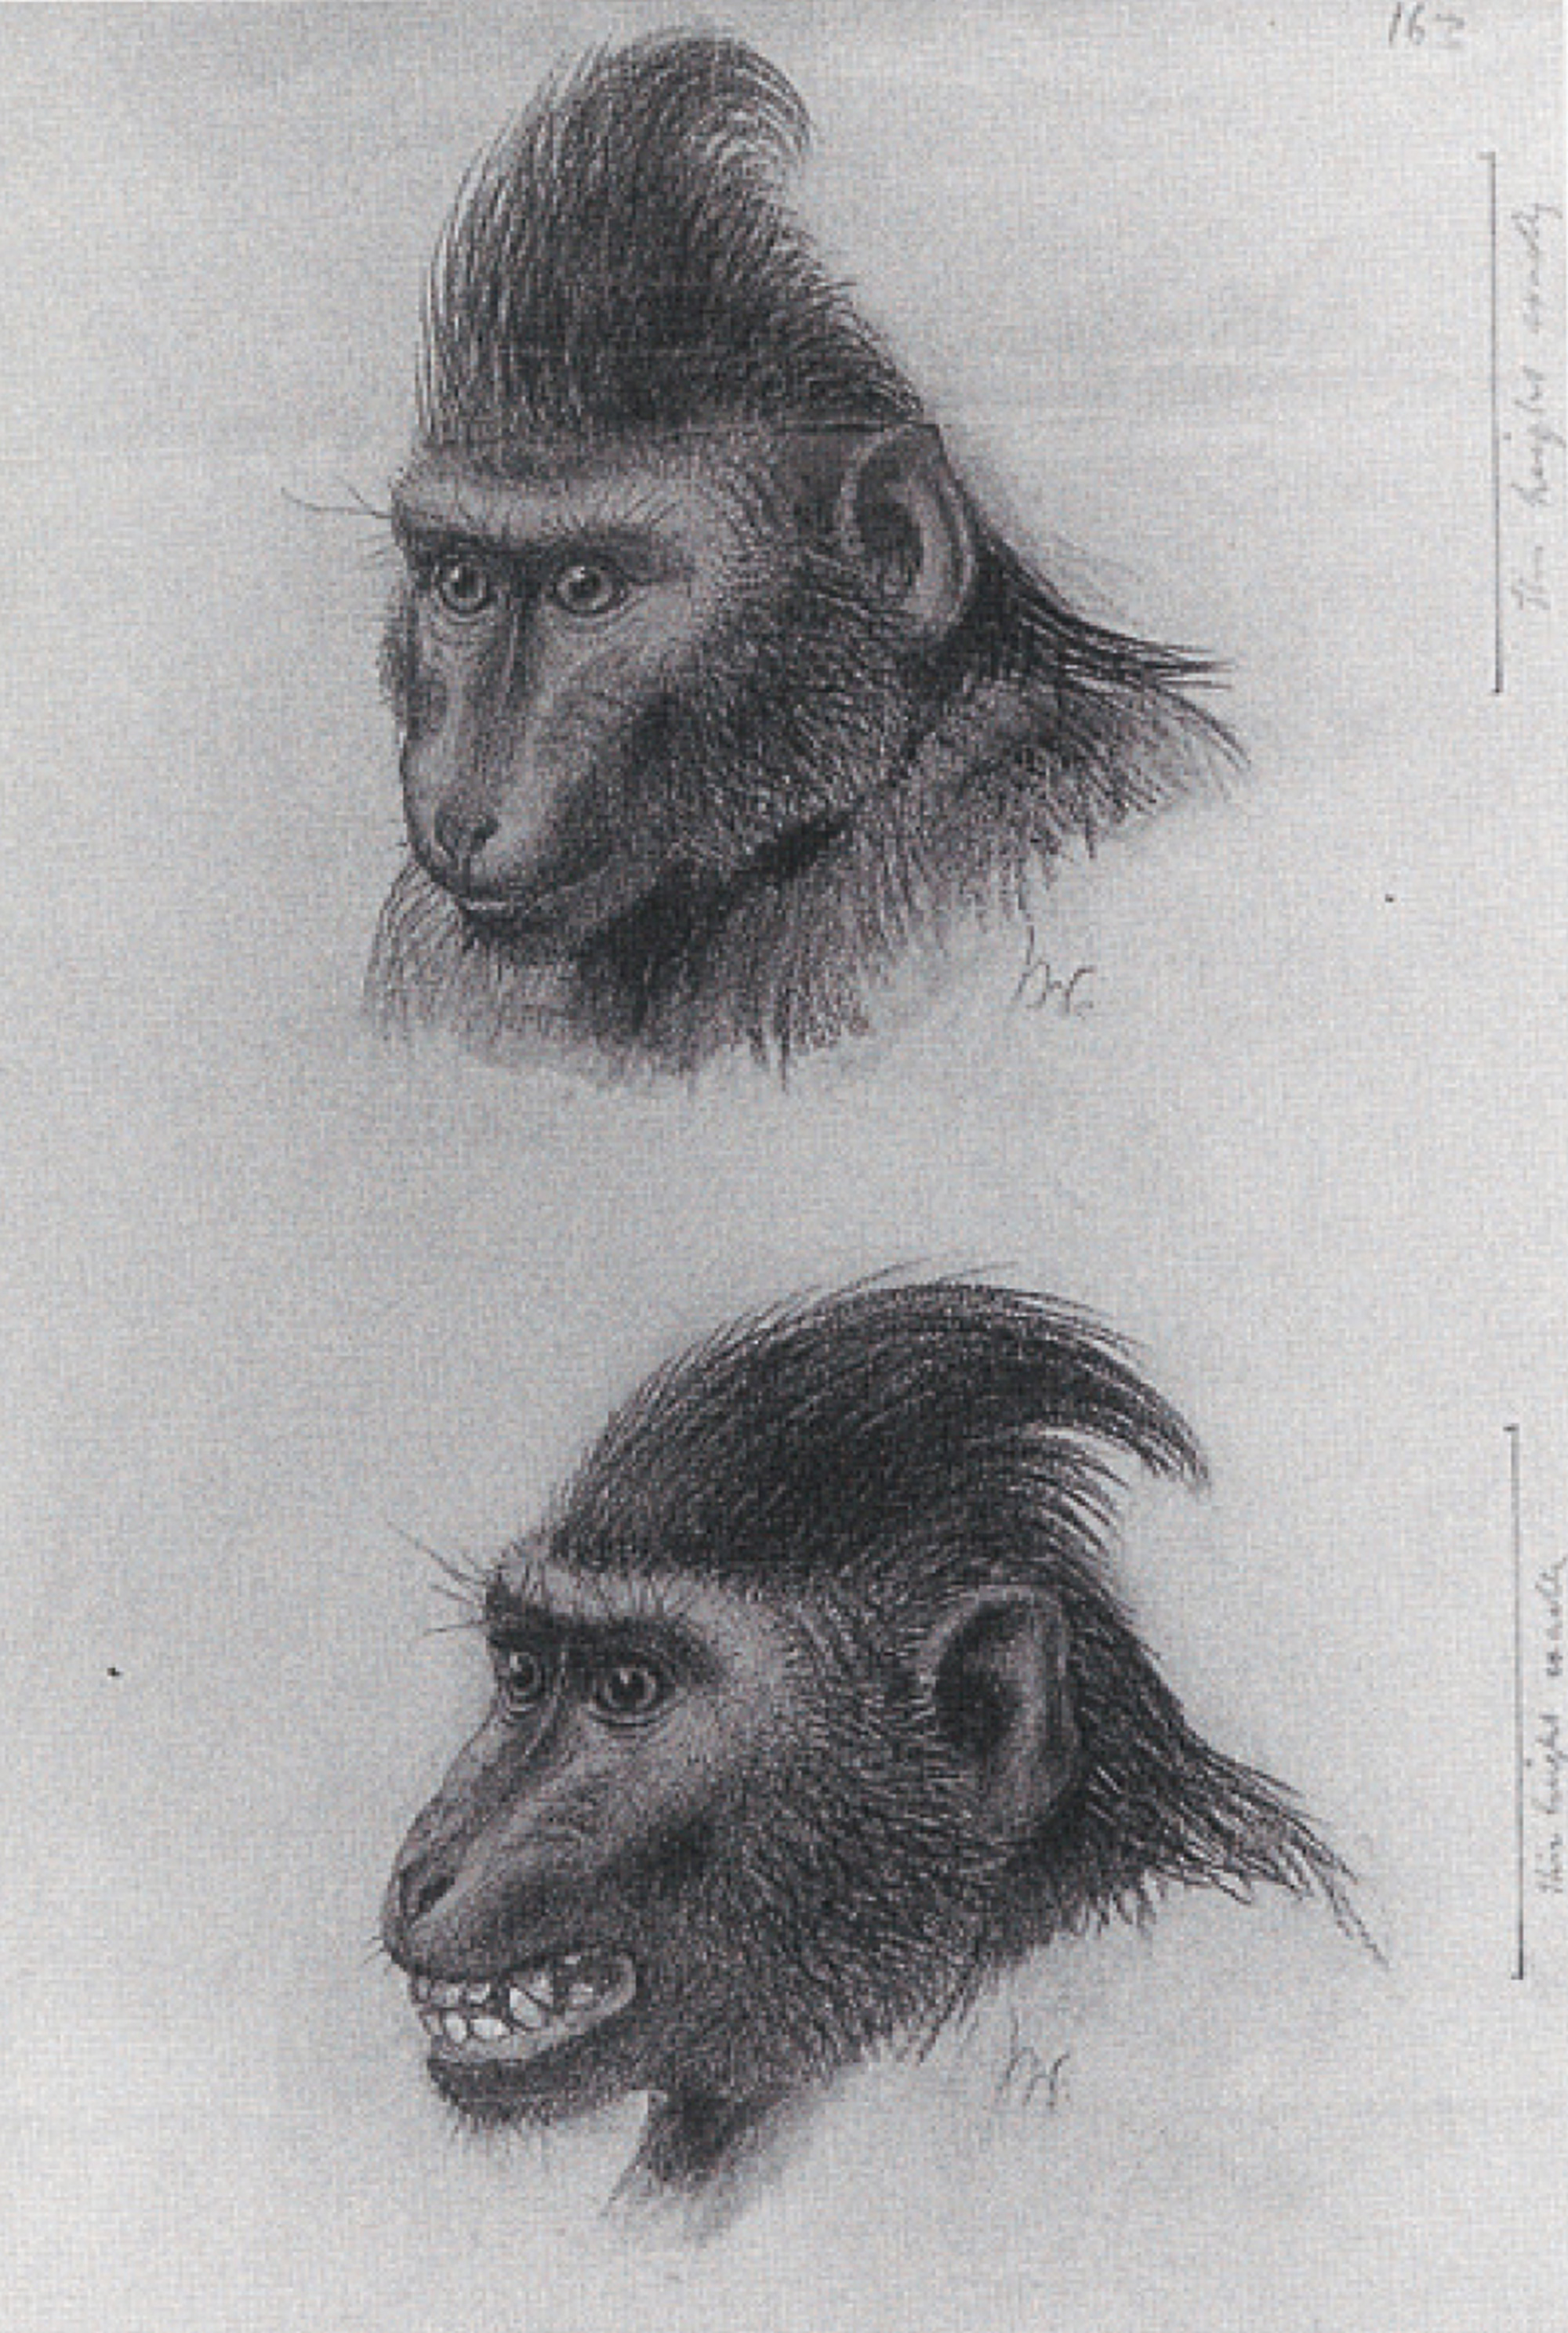 Joseph Wolf’s drawings of a monkey, which he entitled Cynopithecus niger, in a Placid Condition, and The same titillated by sitting on a crawling turtle. Both were reproduced in Charles Darwin’s The Expression of the Emotions in Man and Animals. Courtesy Darwin Archives.